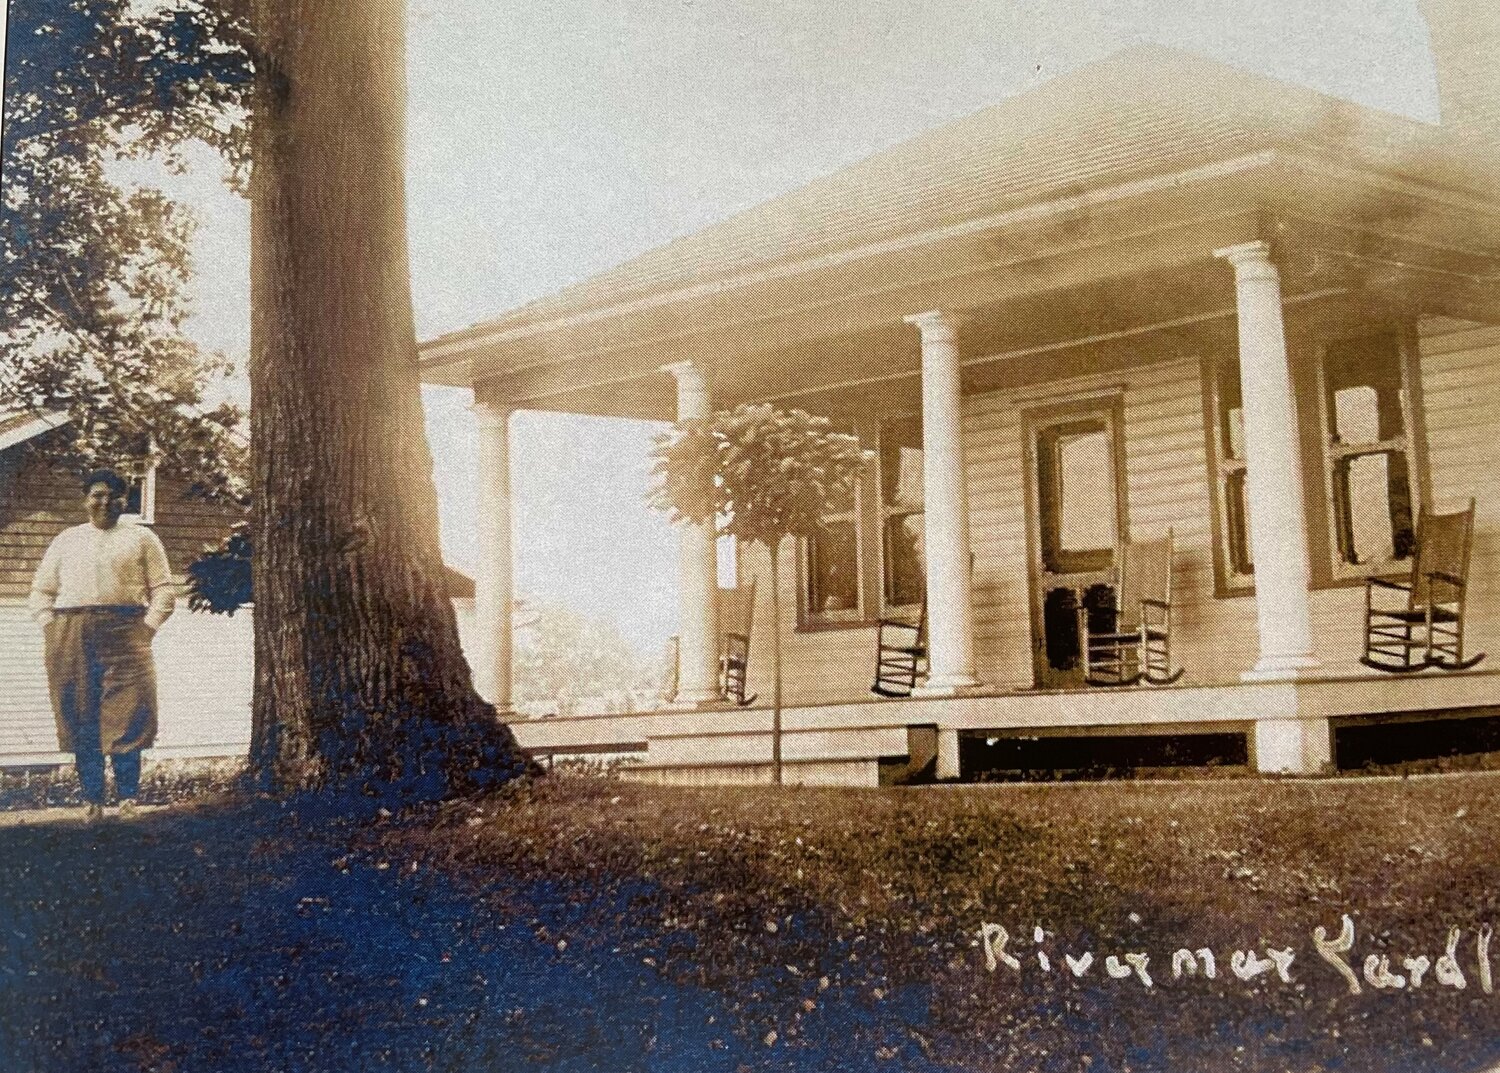 One of the original bungalows built in the Rivermawr neighborhood is shown in a Linford Craven postcard that dates to about 1910.